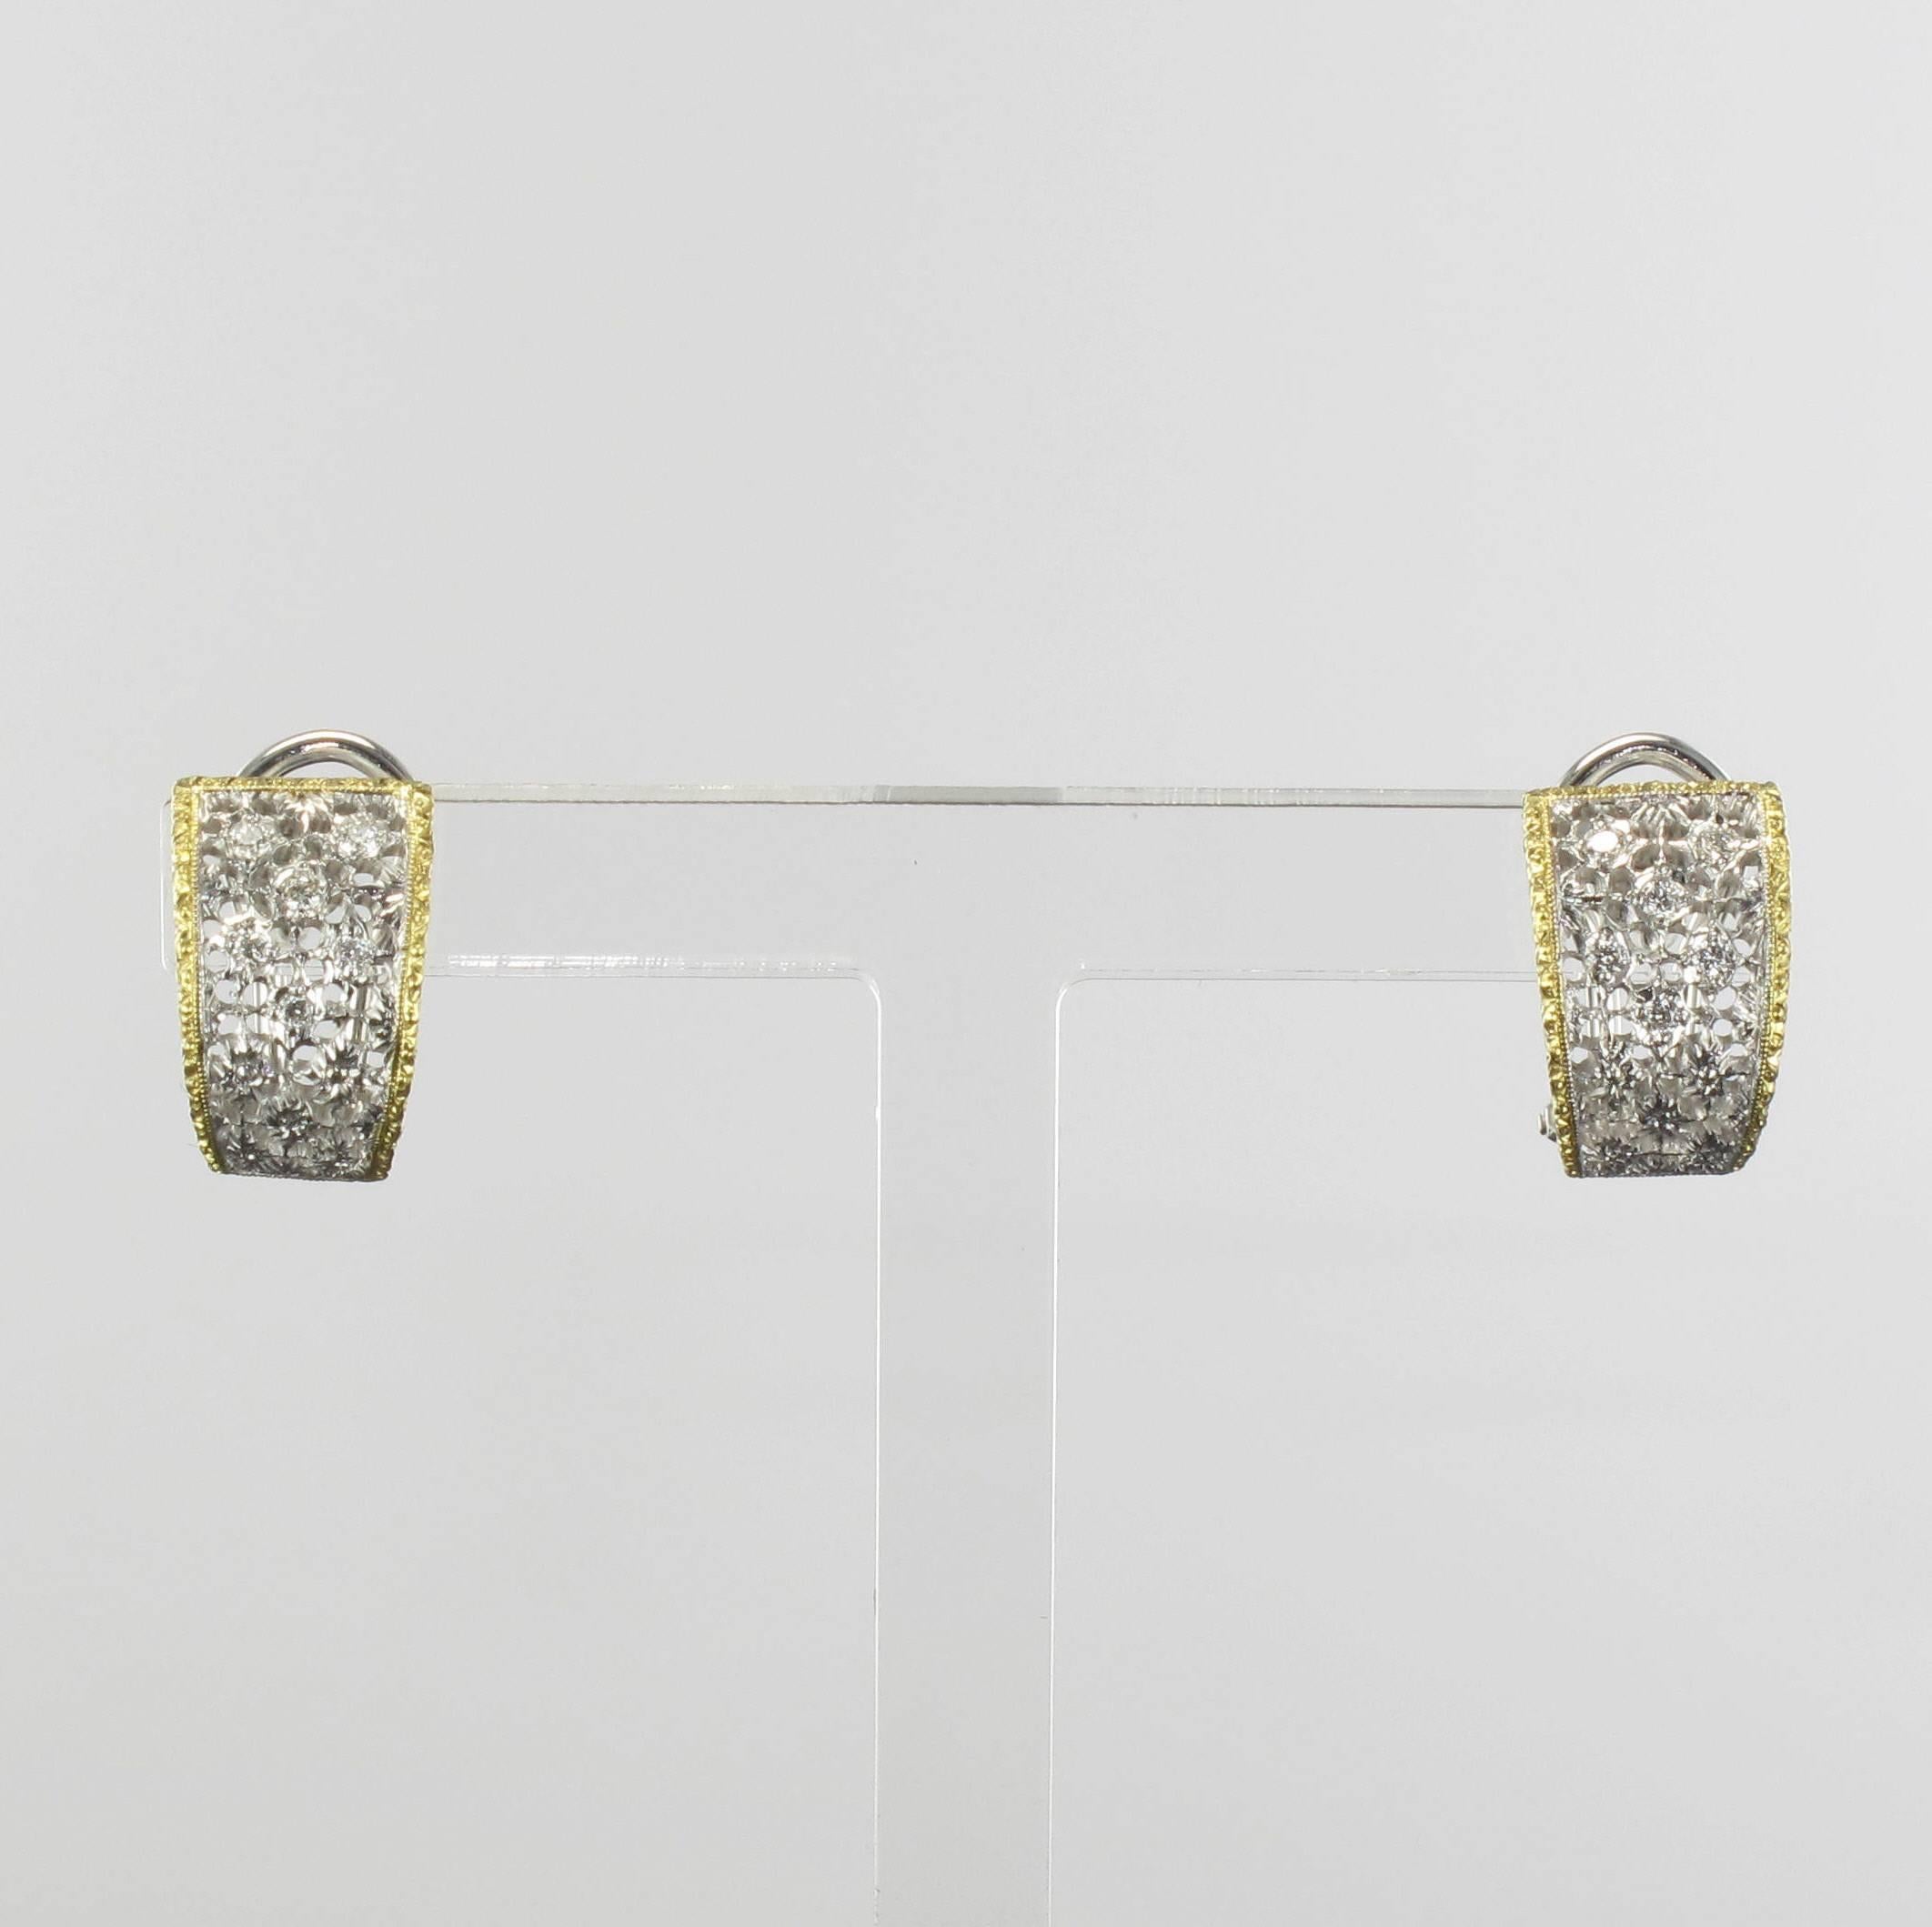 Earrings in 18 carat, white and yellow gold.

These delightful white gold curved earrings are half Creole in style. Each Creole earring is of openwork white gold, set with 8 small brilliant cut diamonds at the front and edged with yellow gold